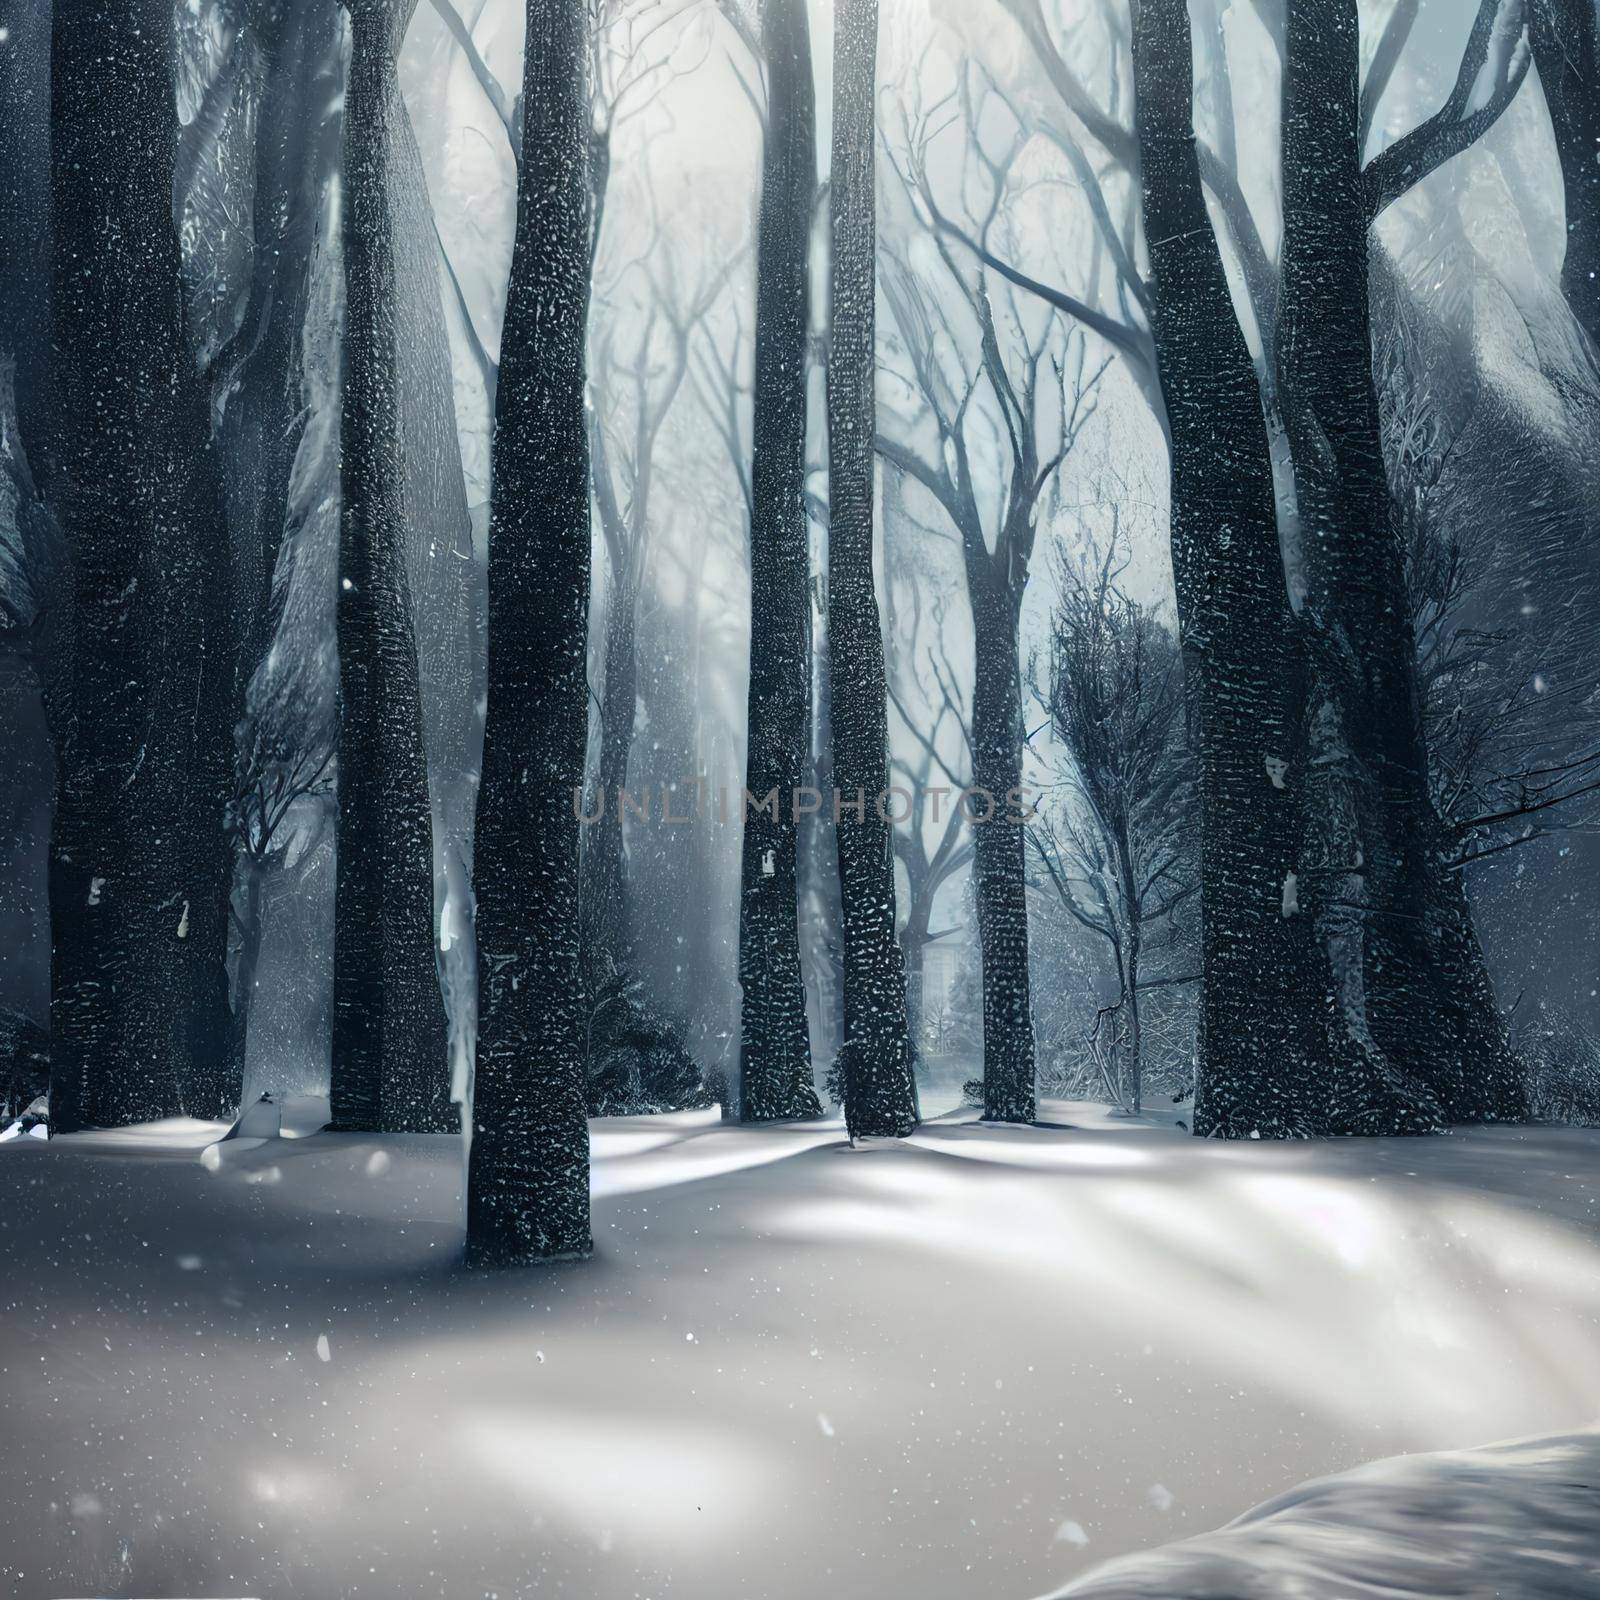 Gloomy image of a snowy forest by NeuroSky